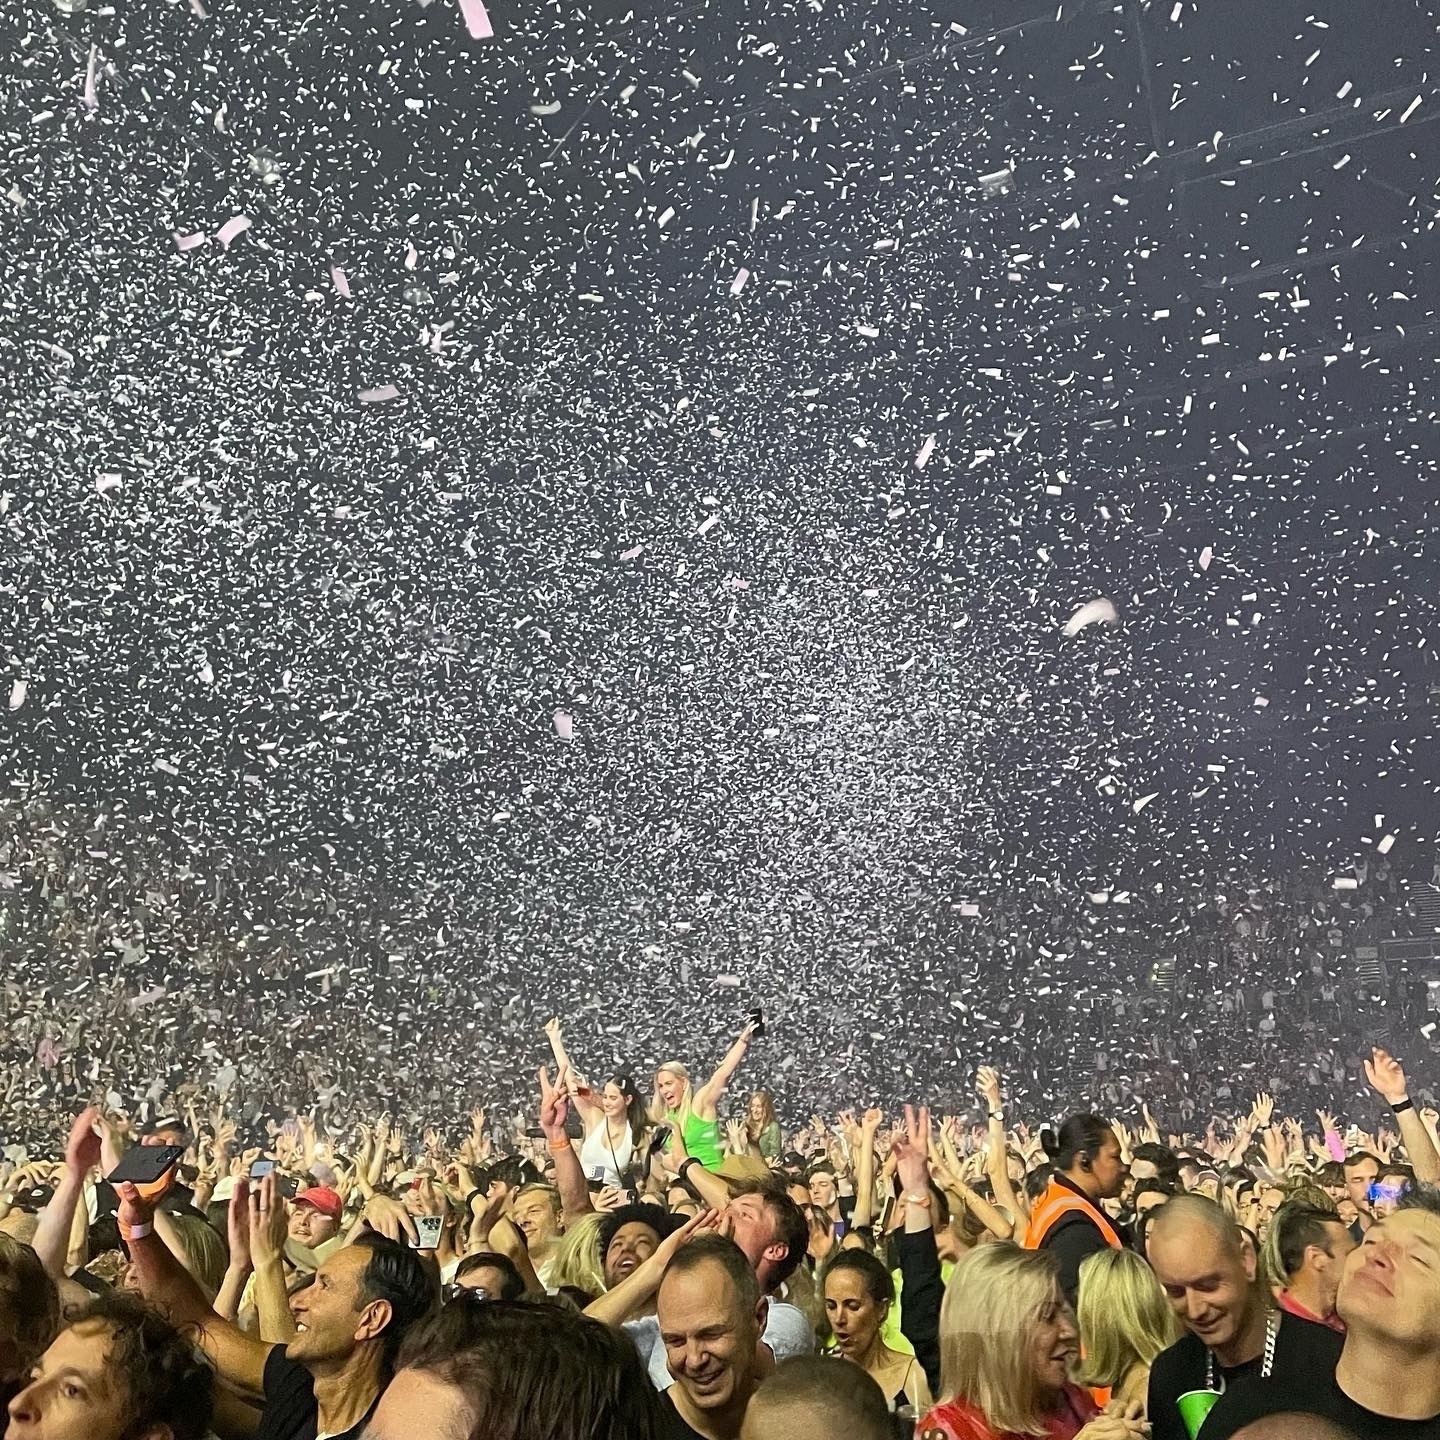 A concert crowd seemingly stretching to the horizon, under a blizzard of white paper confetti 